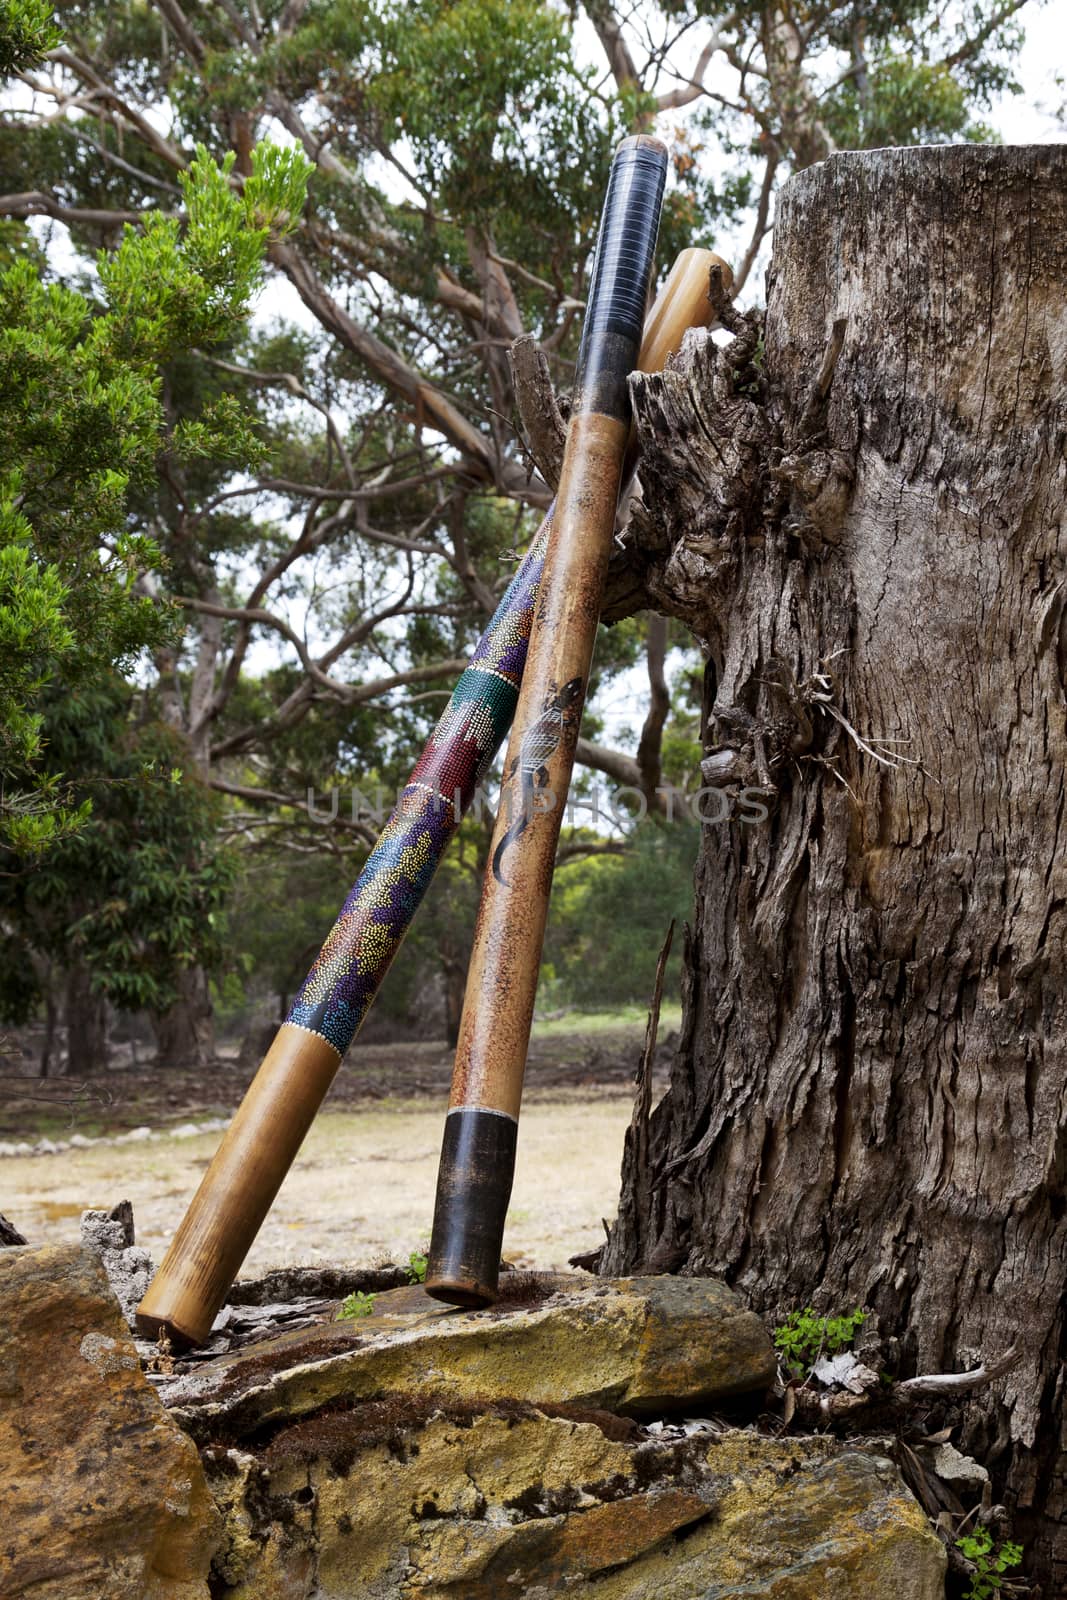 Pair of didgeridoos, indigenous Australian musical, wind instruments, rest against an enormous, old tree stump.  Location is Kangaroo Island in South Australia.  Native instrument still in use today and sometimes called a drone pipe. 